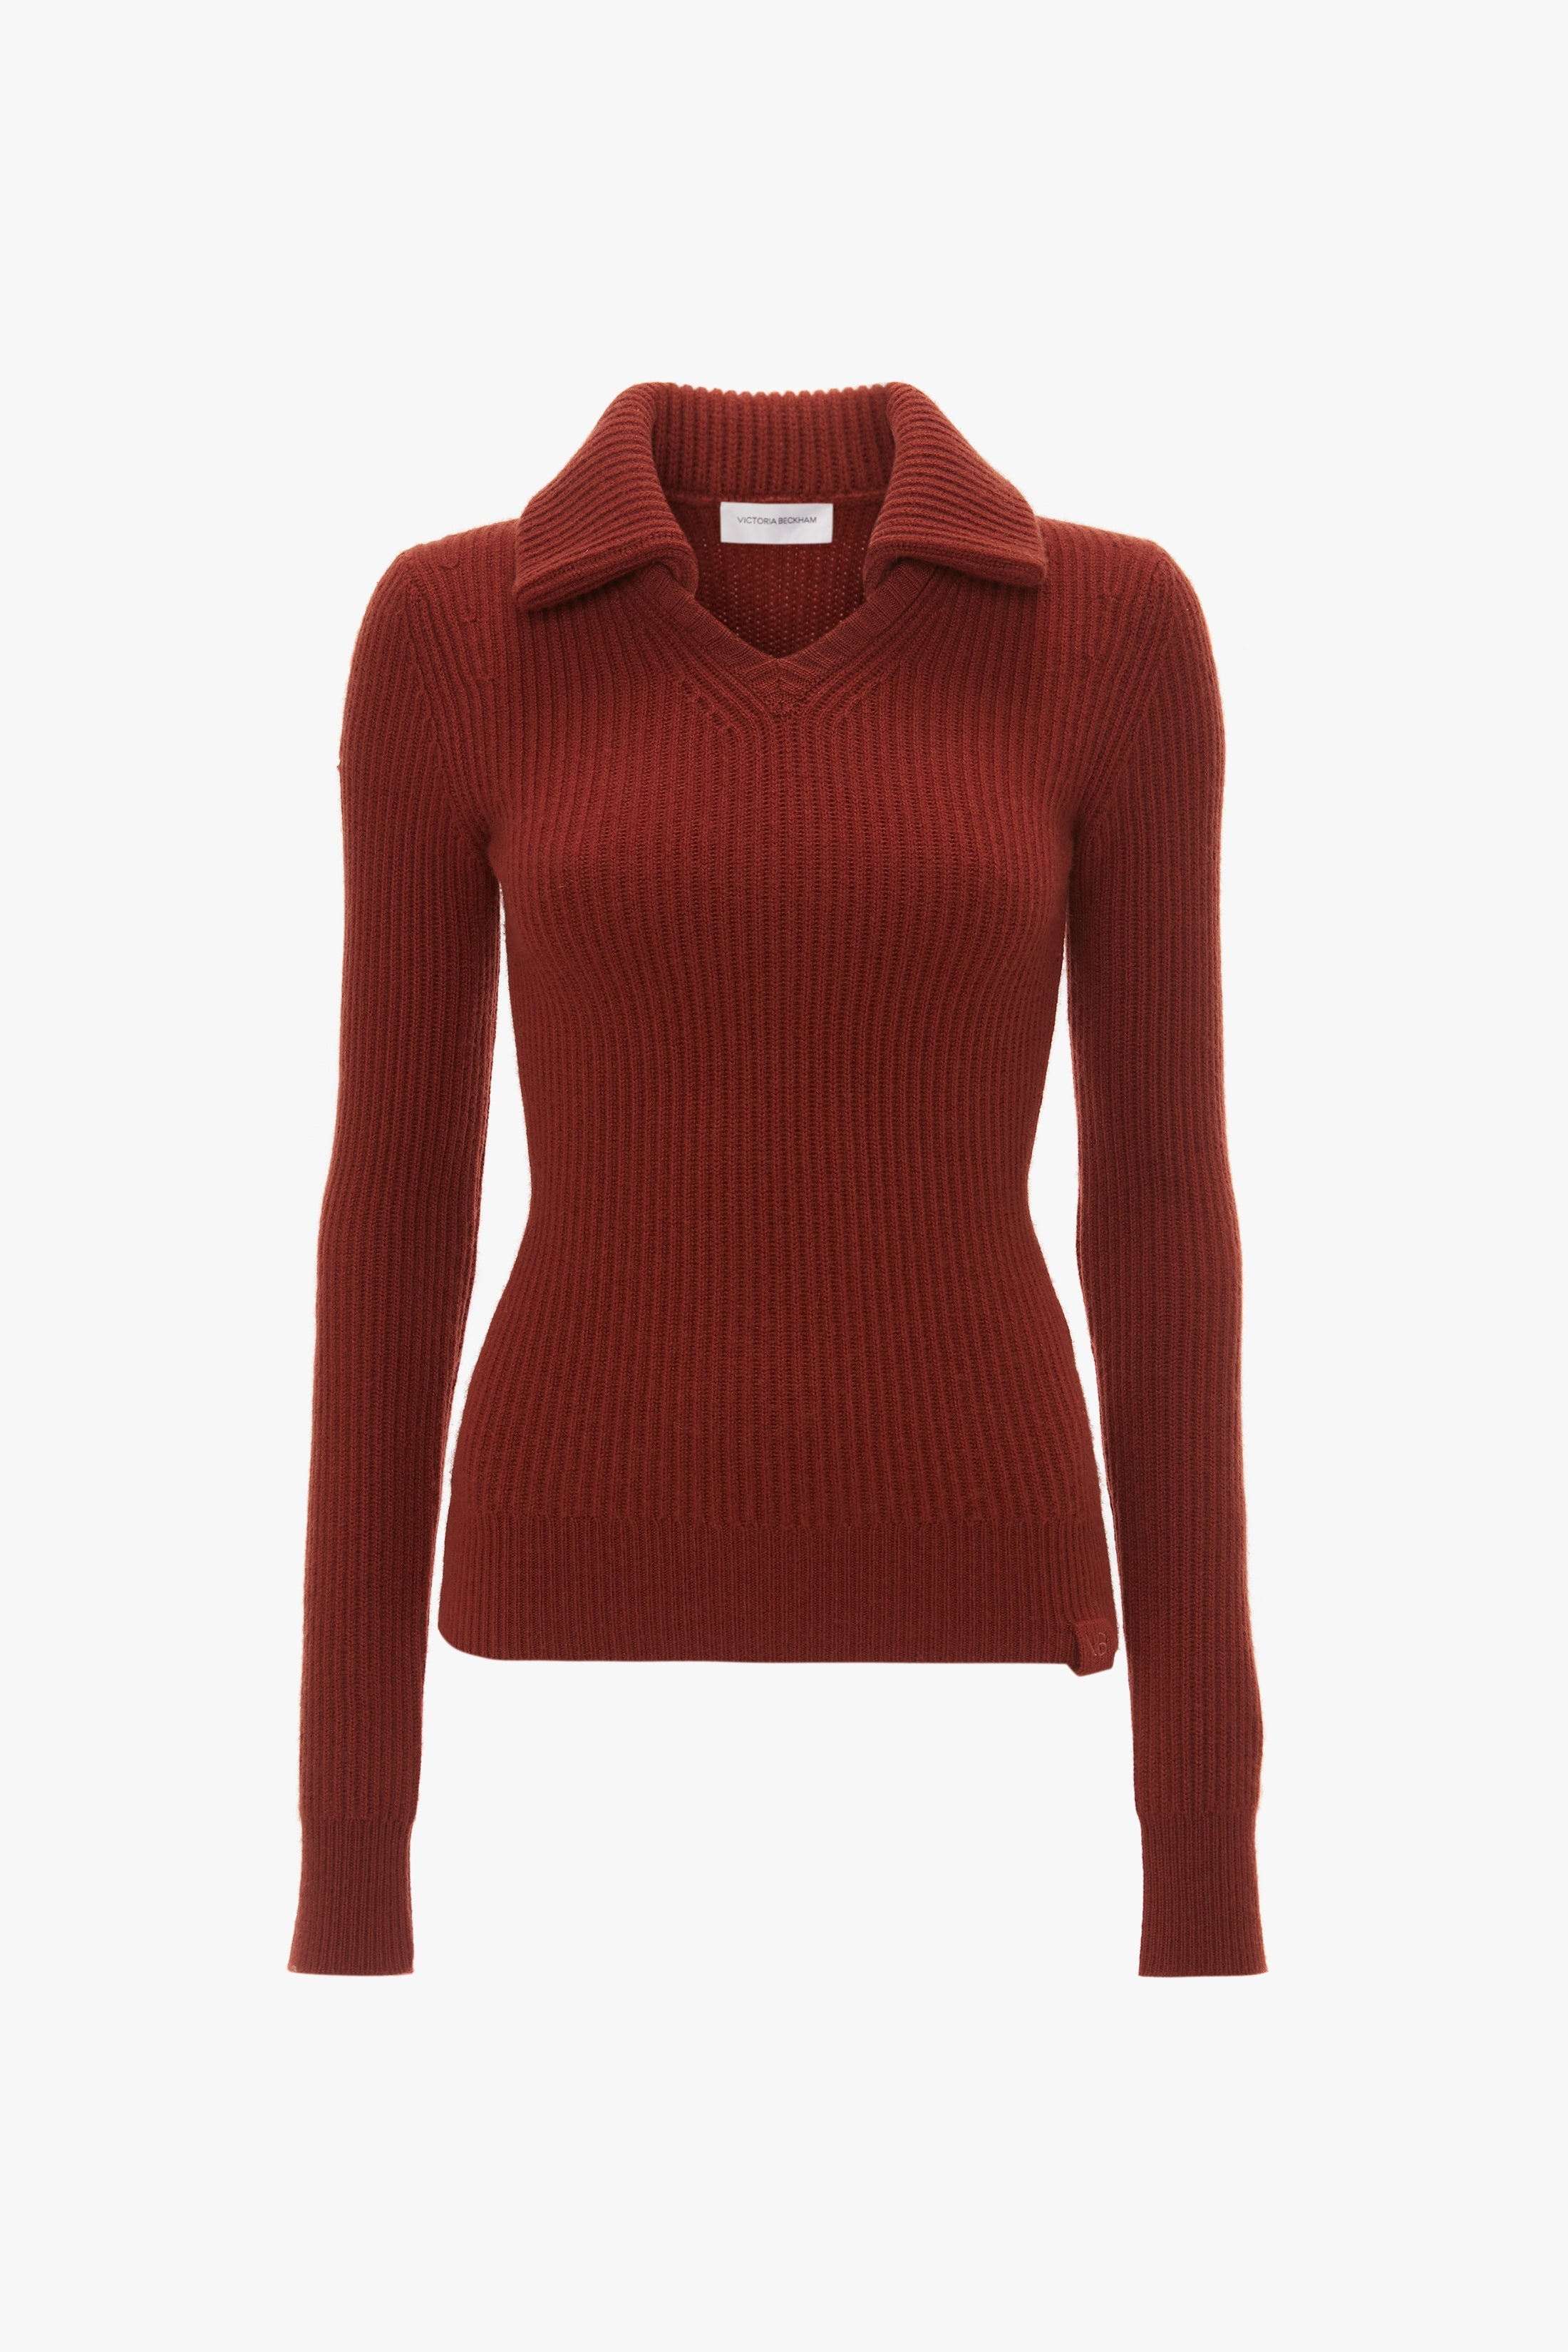 Double Collared Jumper In Russet - 1